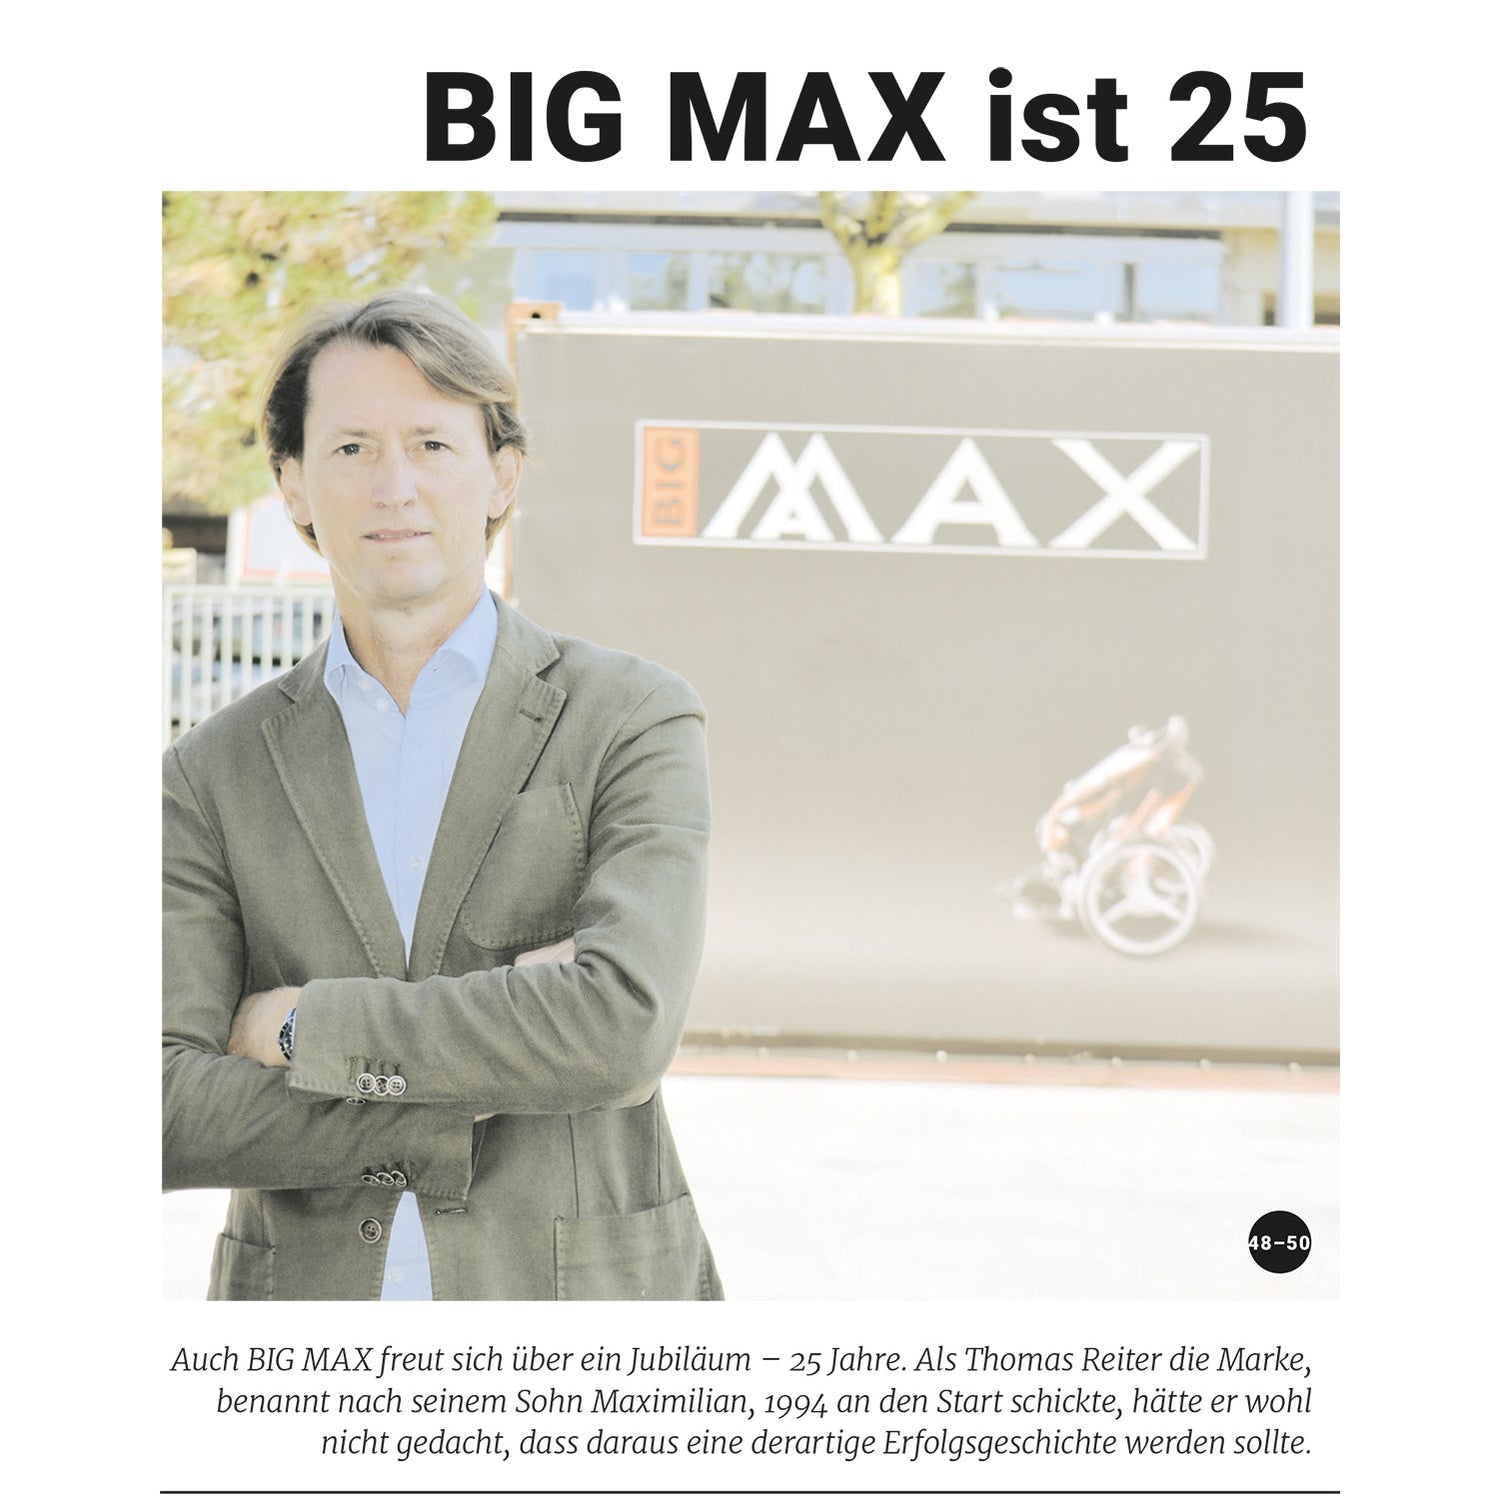 25 years of BIG MAX - we're celebrating a birthday!